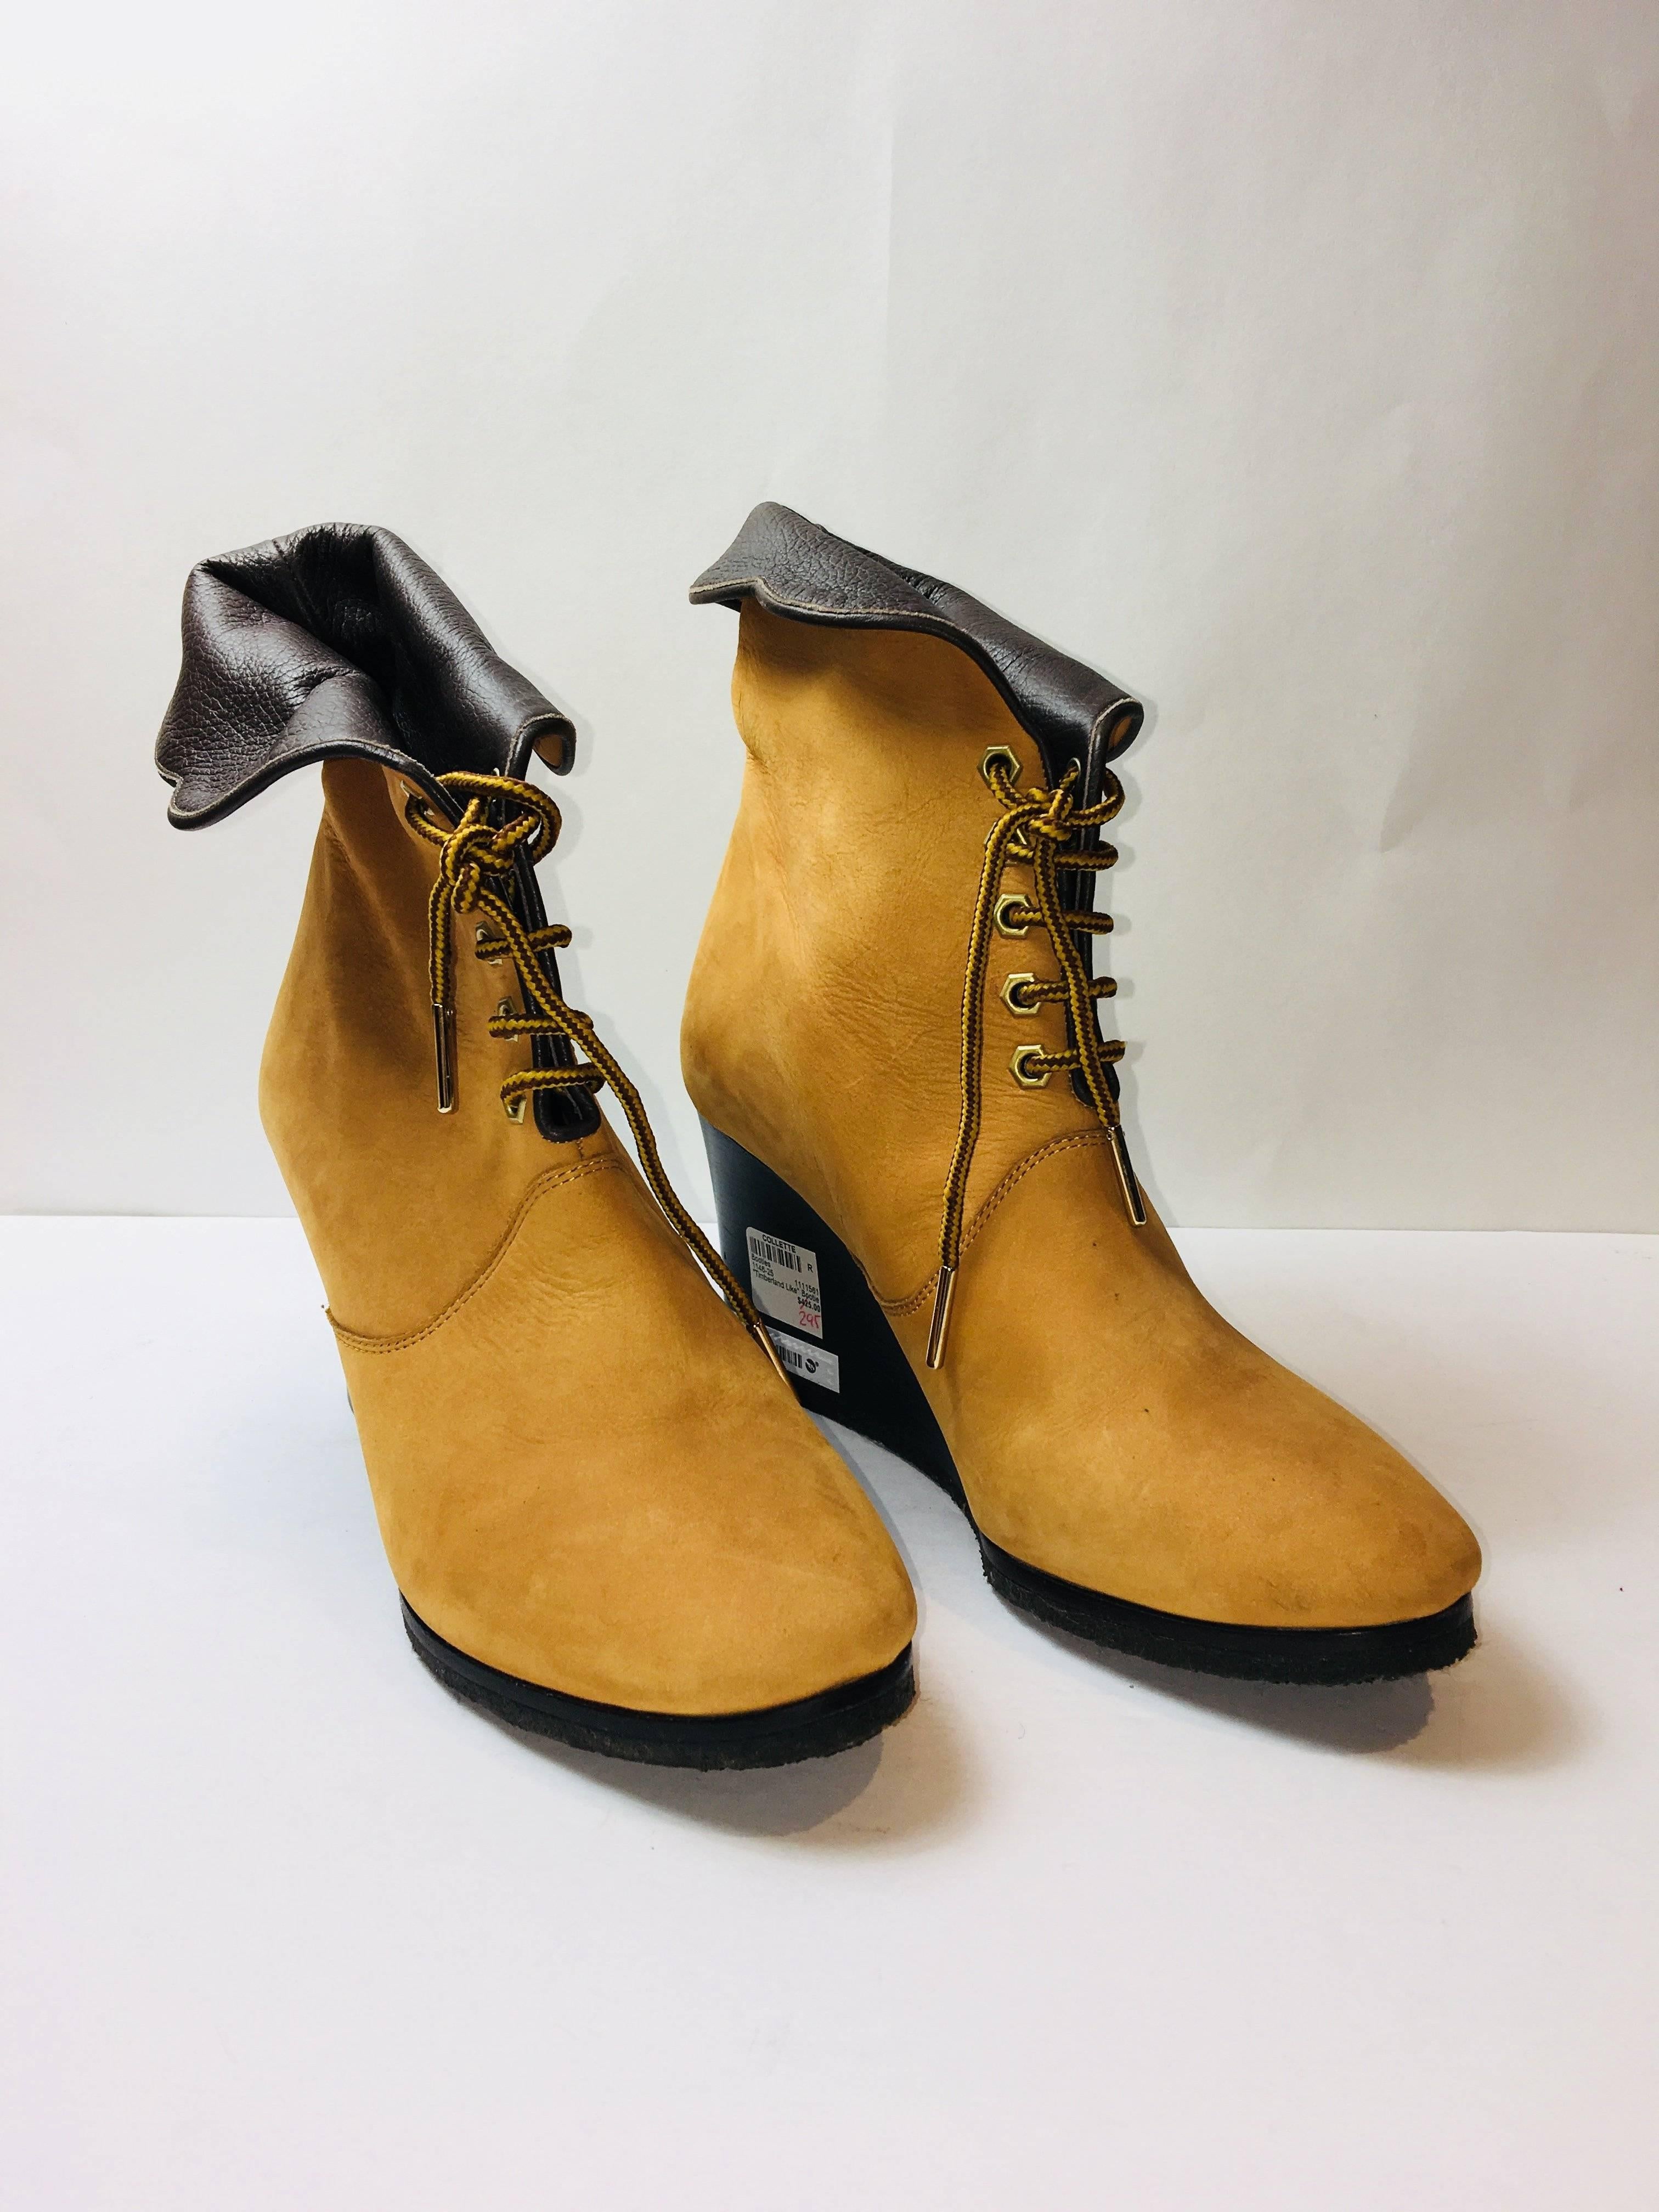 Chloe Tan Leather Wedge Booties with Dark Brown Interior,  "Timberland" Style and Wedge Heel.